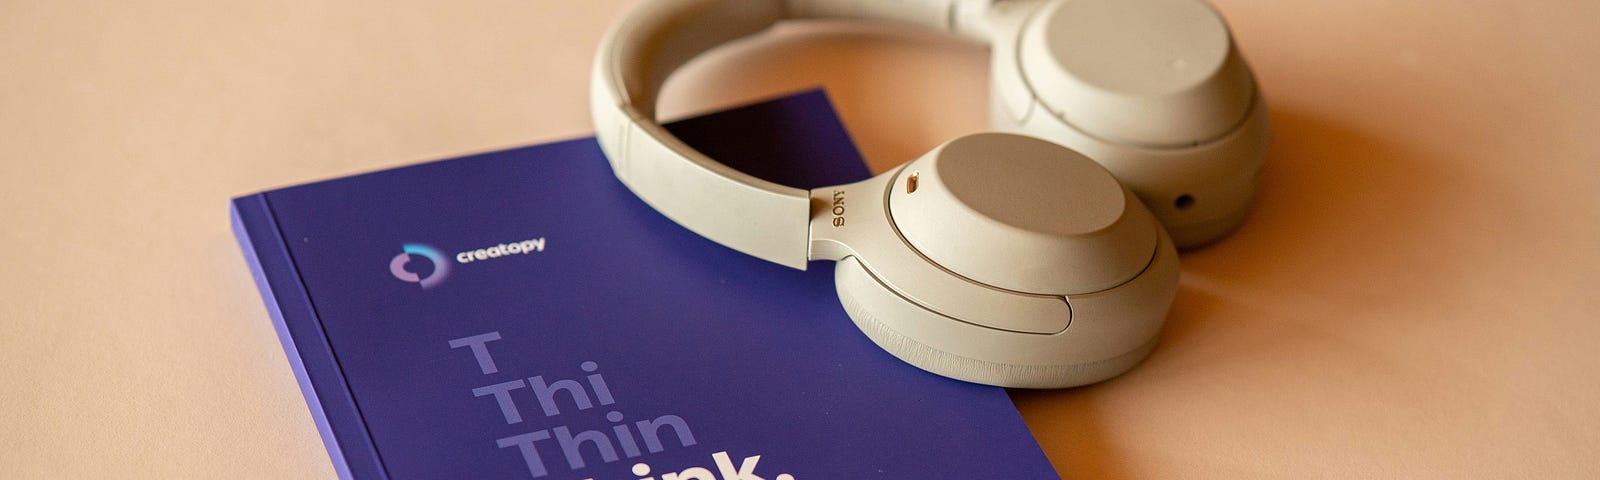 Notebook with “think” on it and headphones on a minimalist office desk.